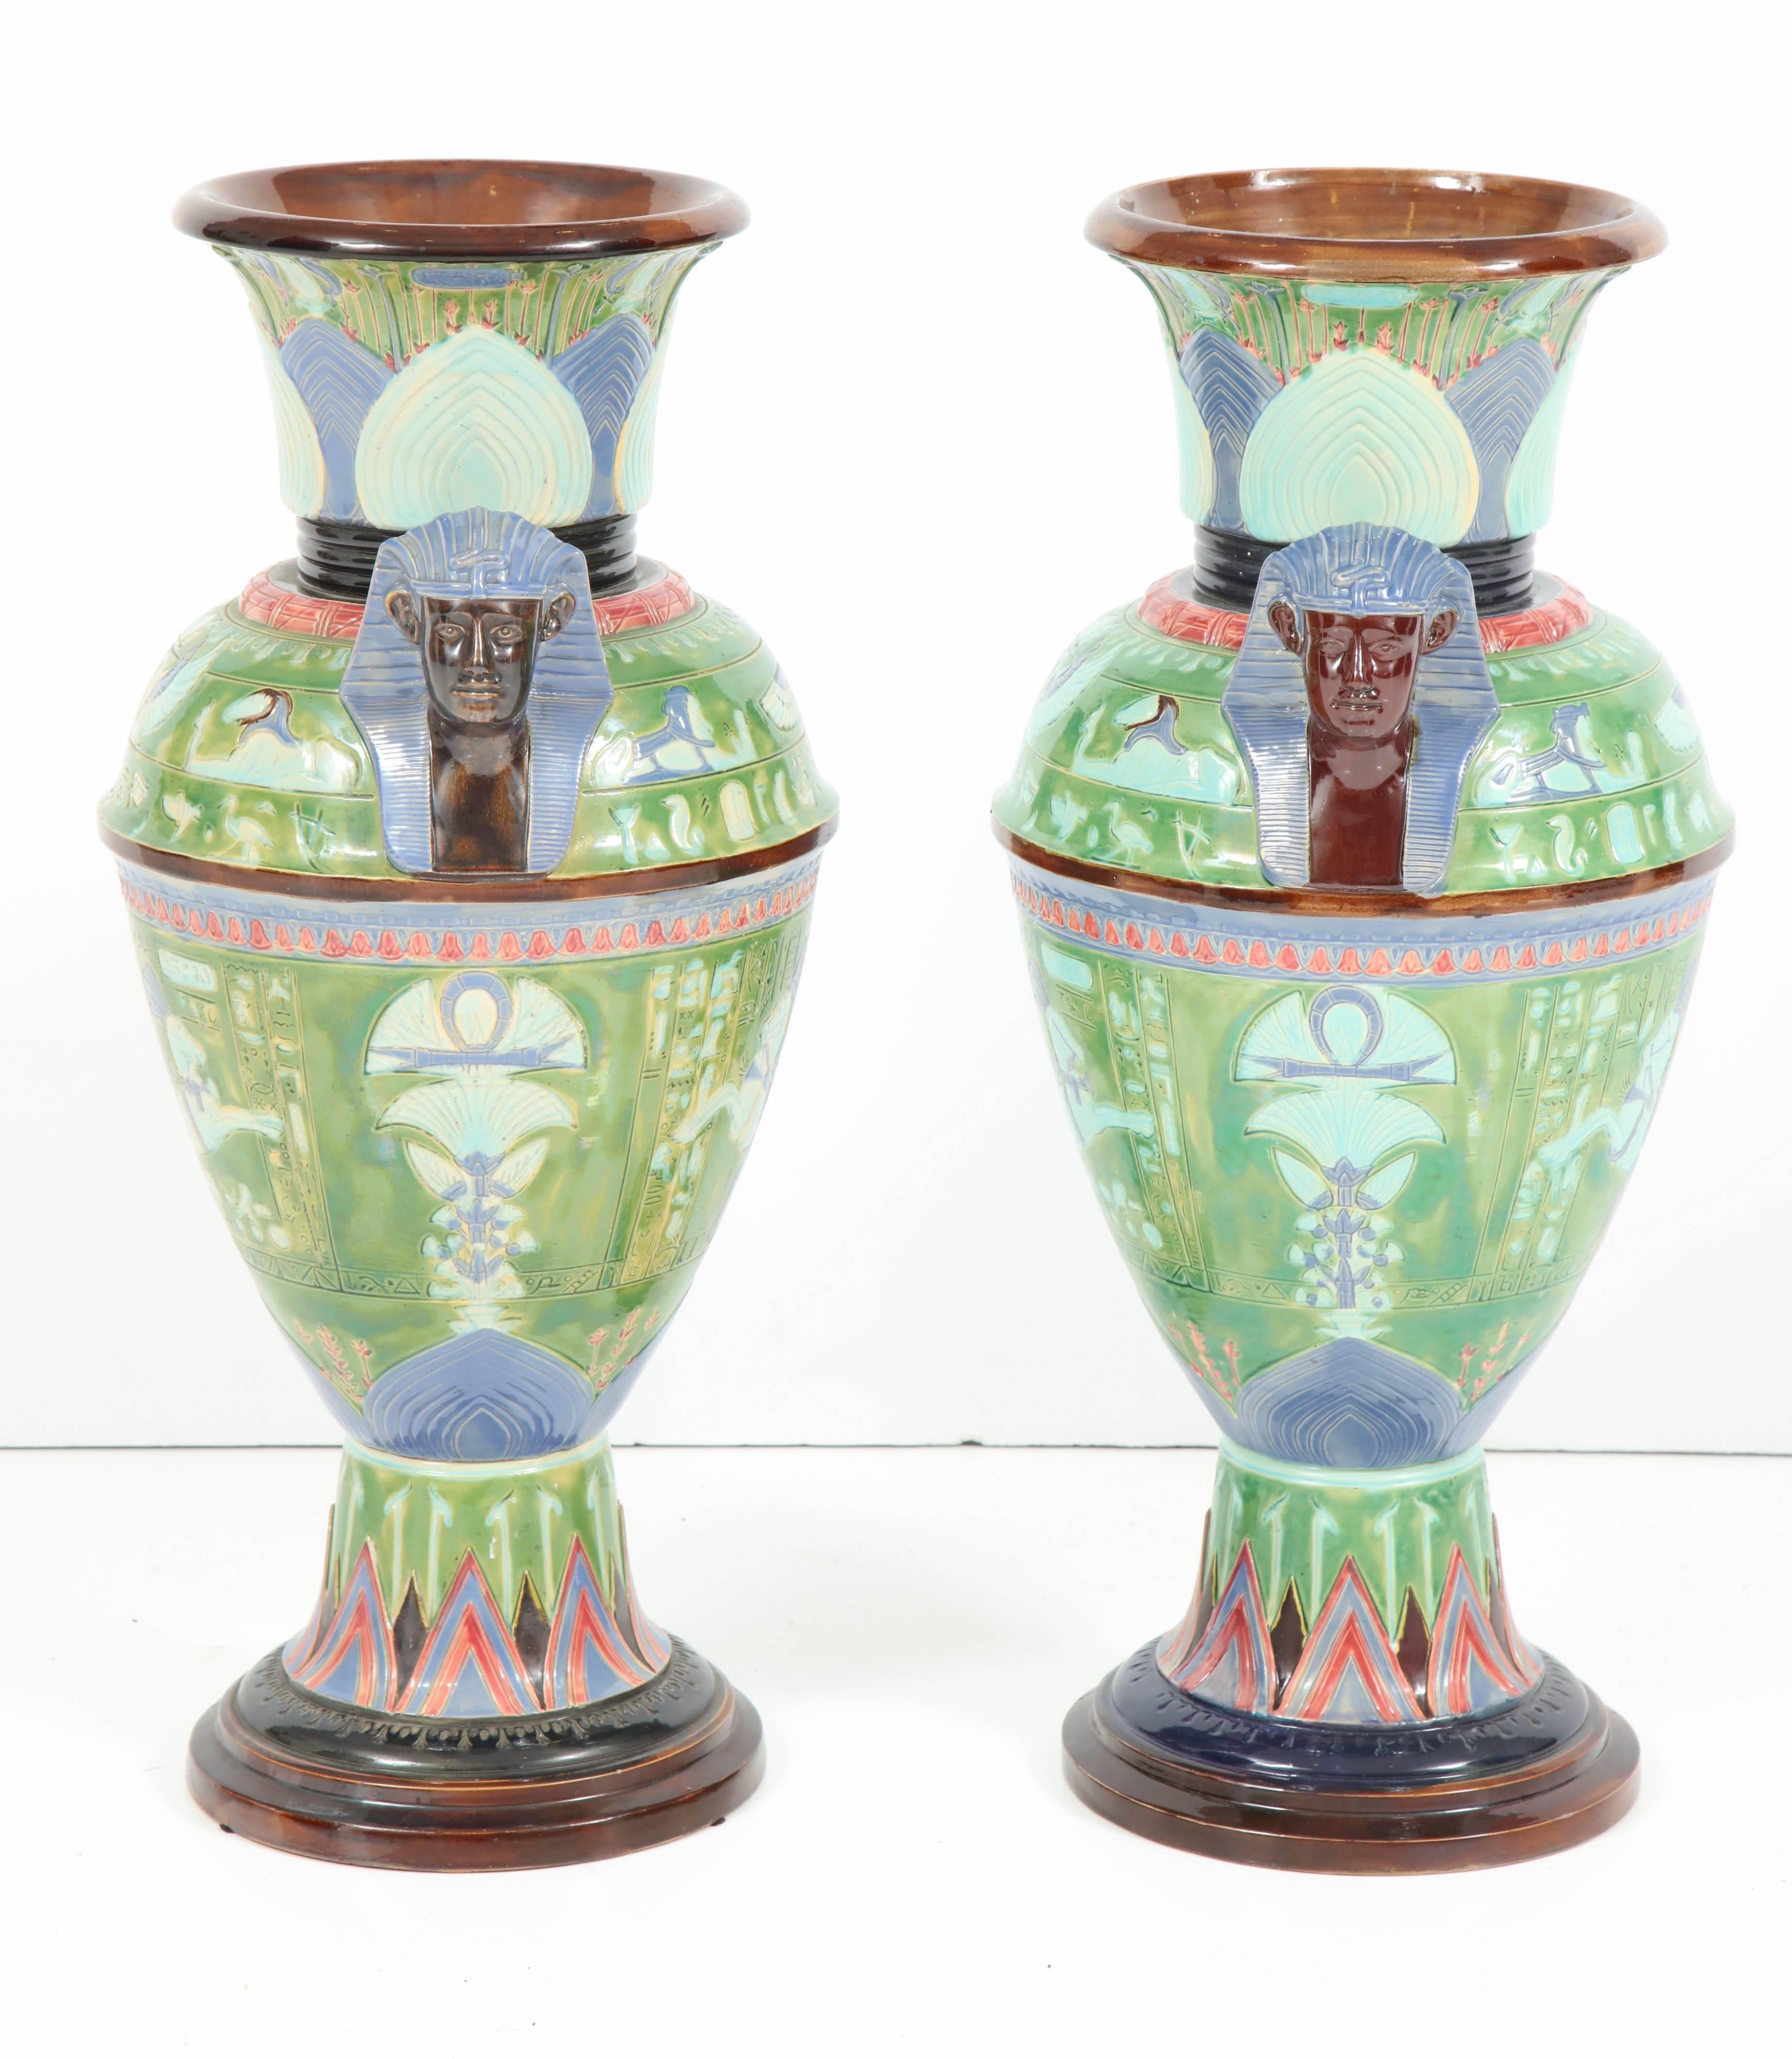 Unknown Pair of Egyptian Revival Ceramic Vases